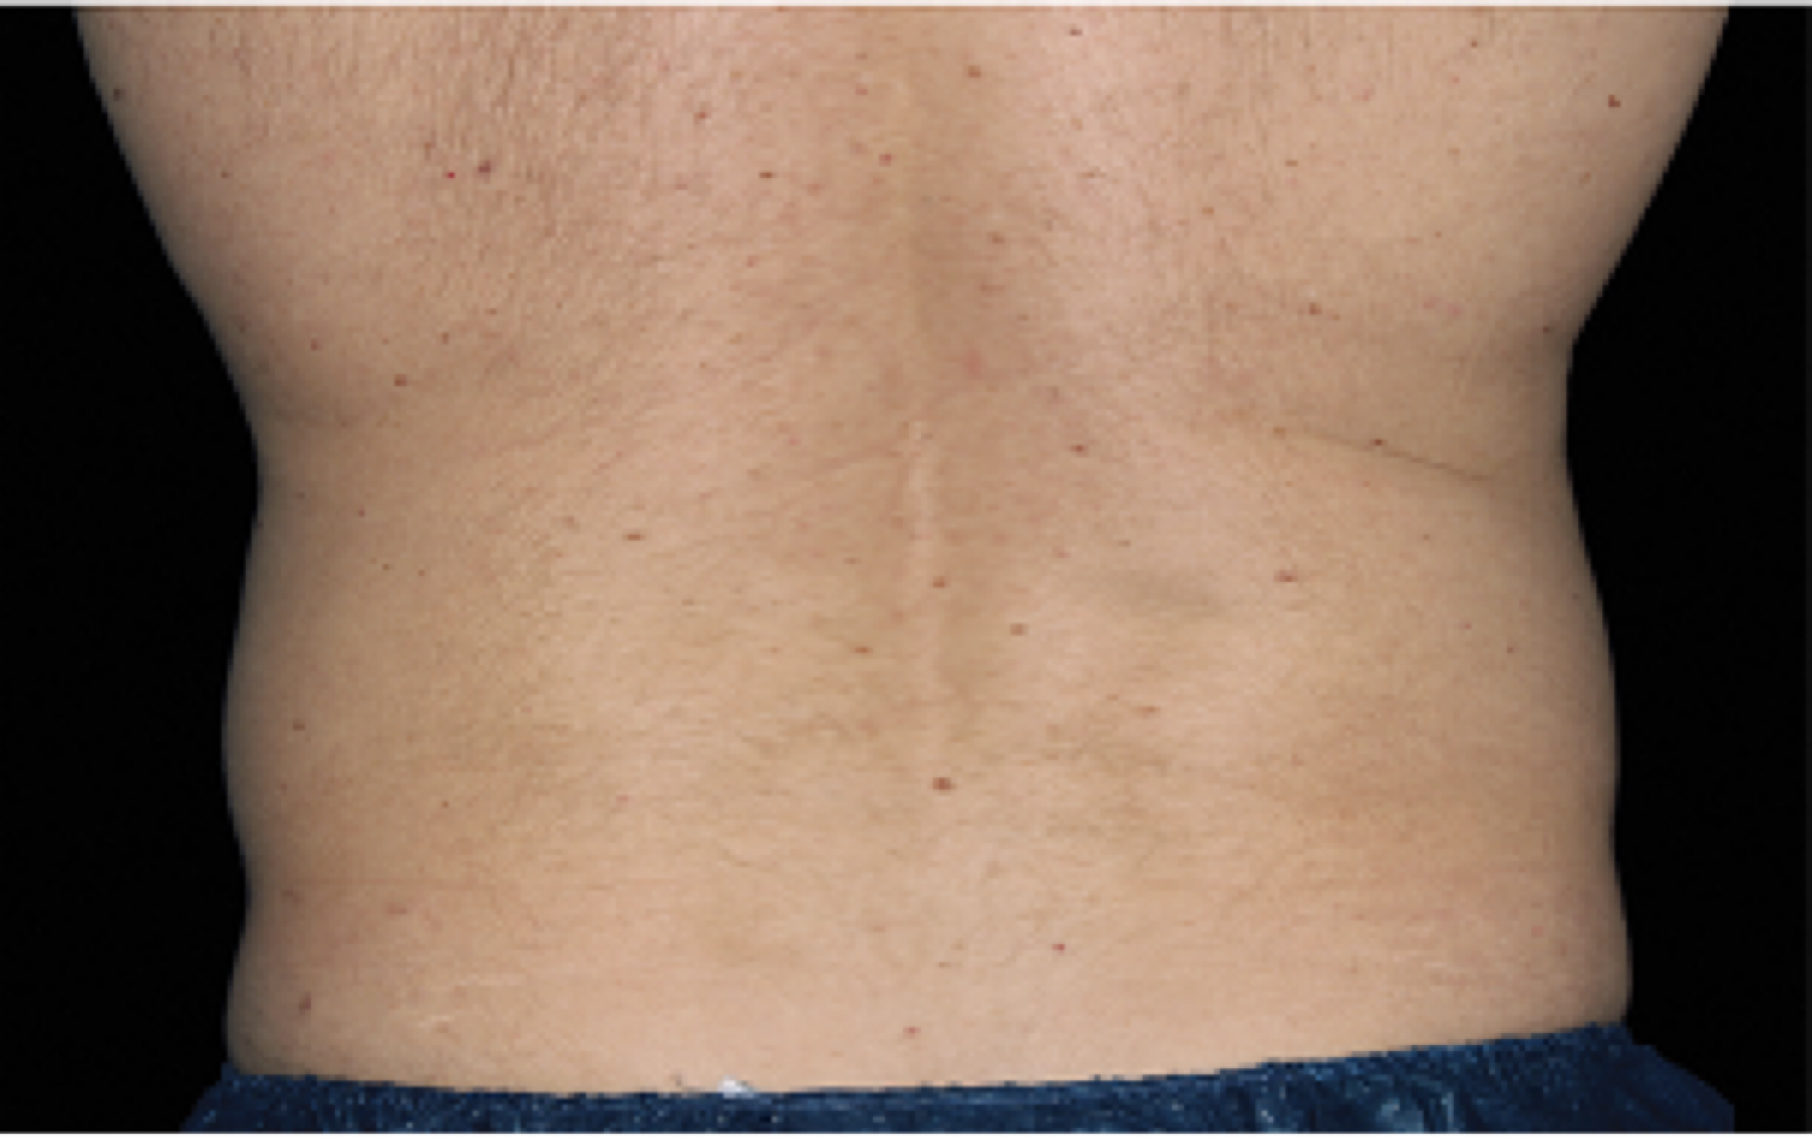 CoolSculpting Elite flank removal